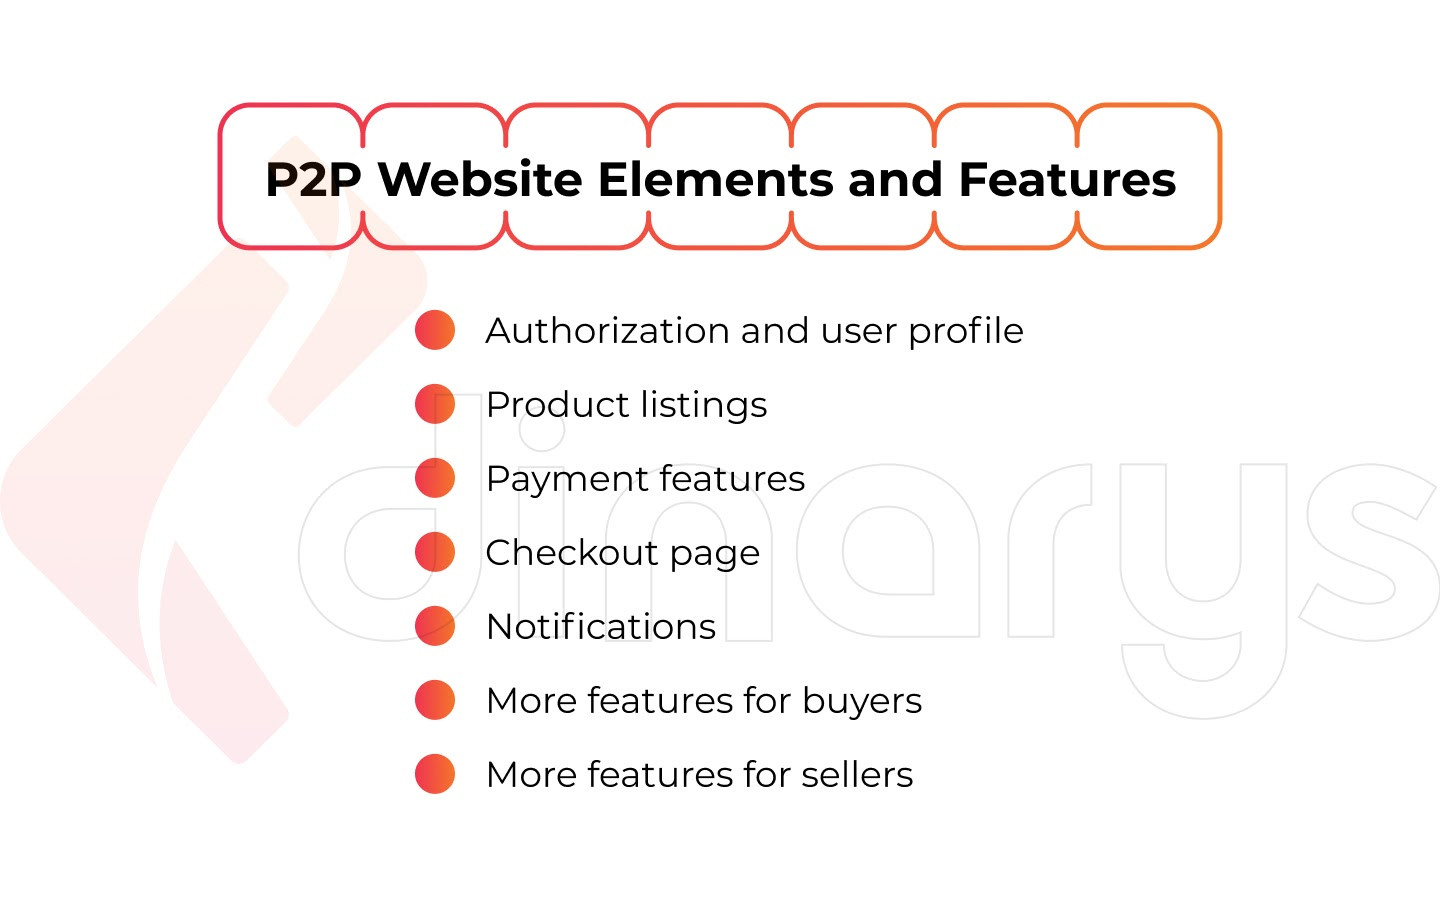 Essential Elements and Features Your P2P Website Must Have